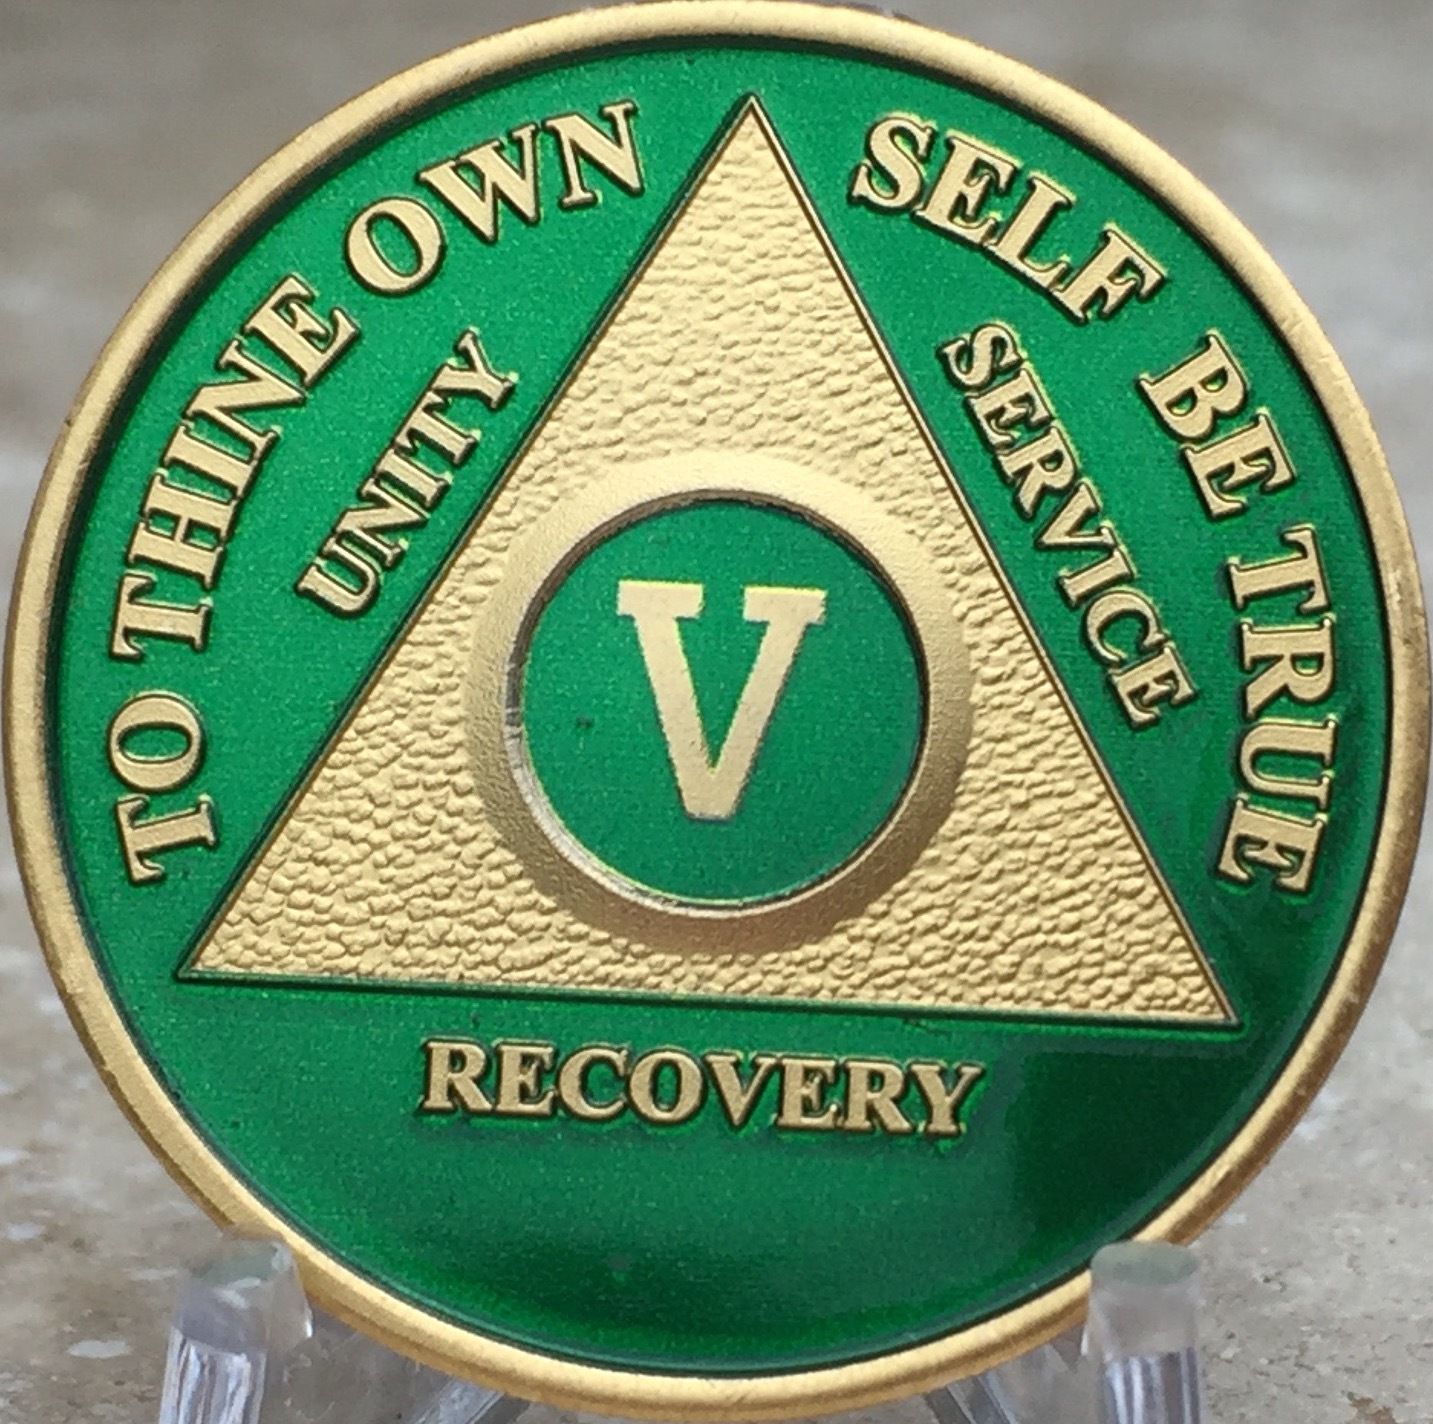 5 Year AA Medallion Green Gold Plated Alcoholics Anonymous Sobriety Chip Coin